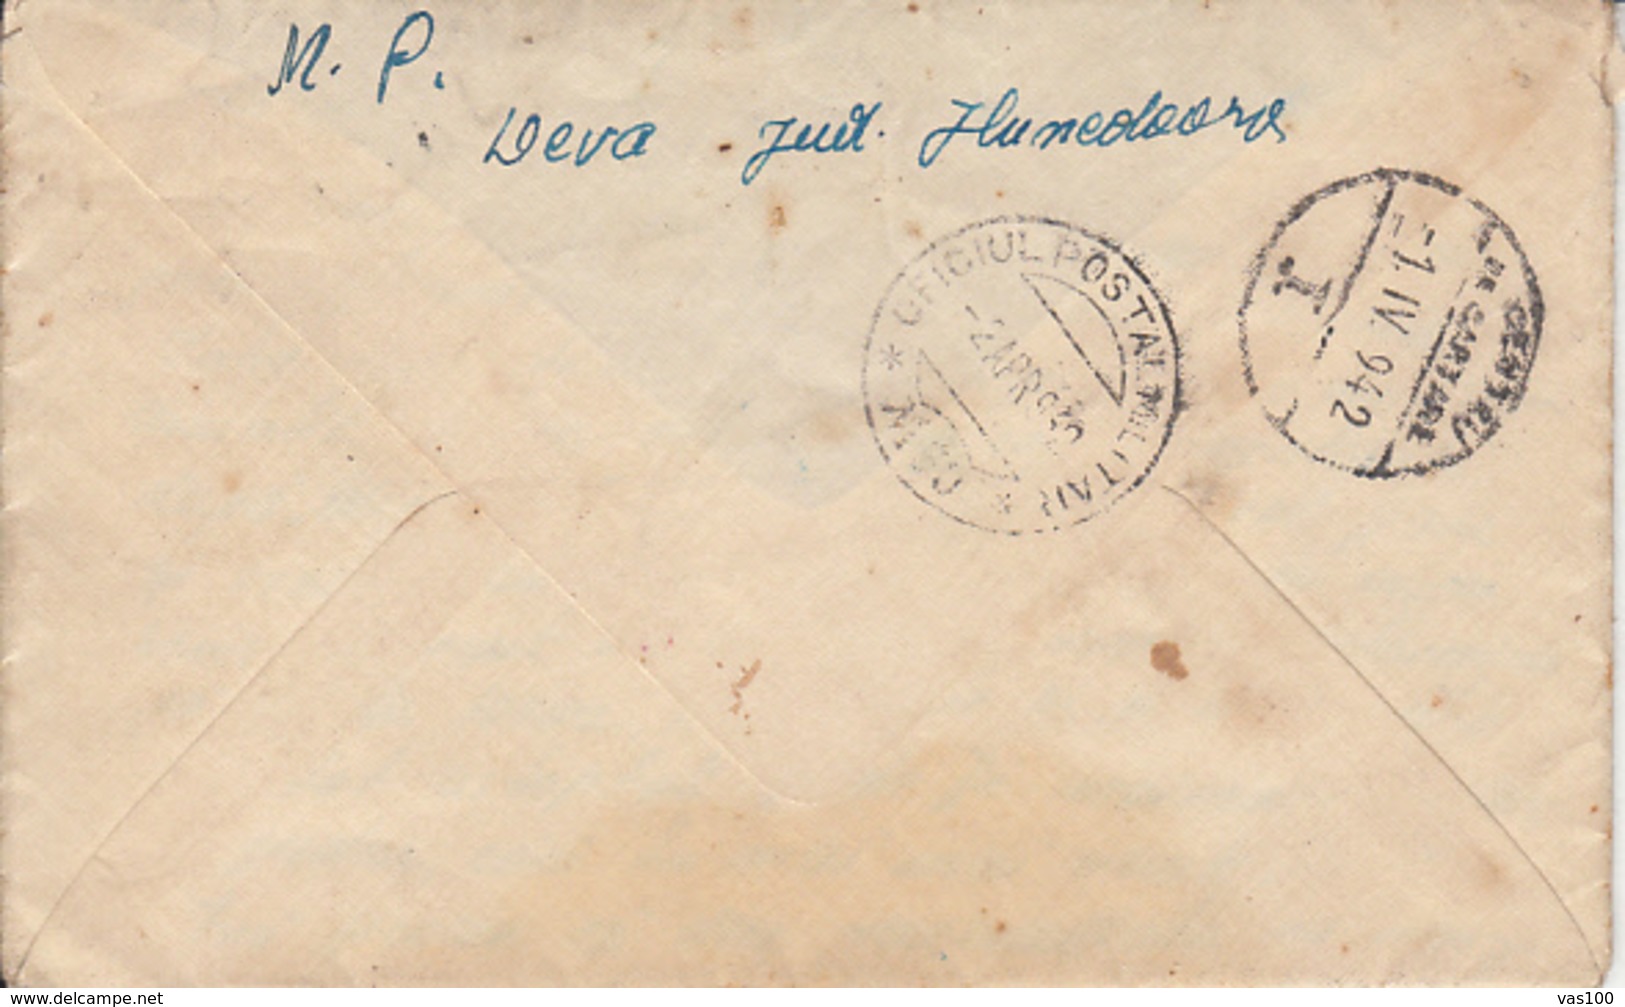 WW2 LETTER, MILITARY CENSORED, DEVA NR 23, WARFIELD POST OFFICE NR 30, 176, KING MICHAEL STAMP ON COVER, 1942, ROMANIA - 2. Weltkrieg (Briefe)